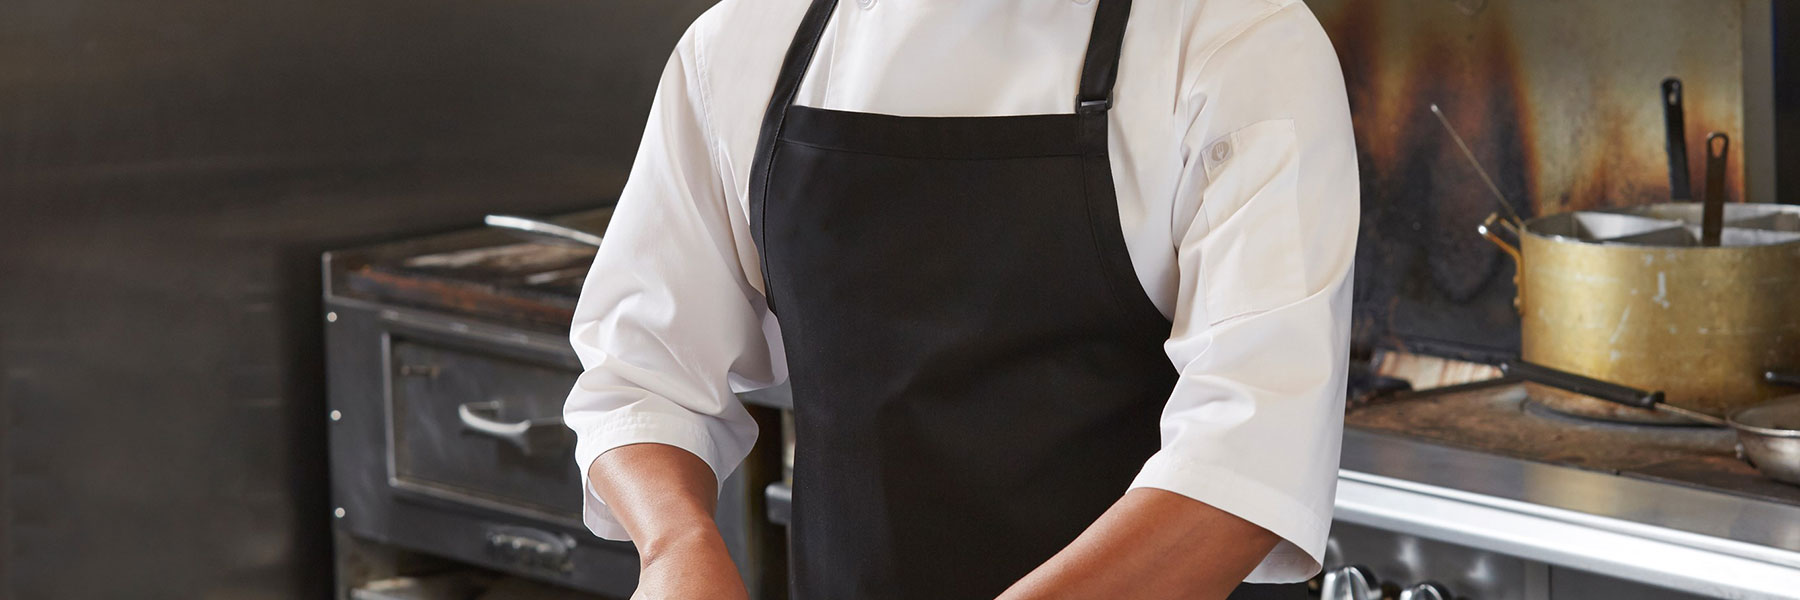 Best Selling Aprons - Chef Works